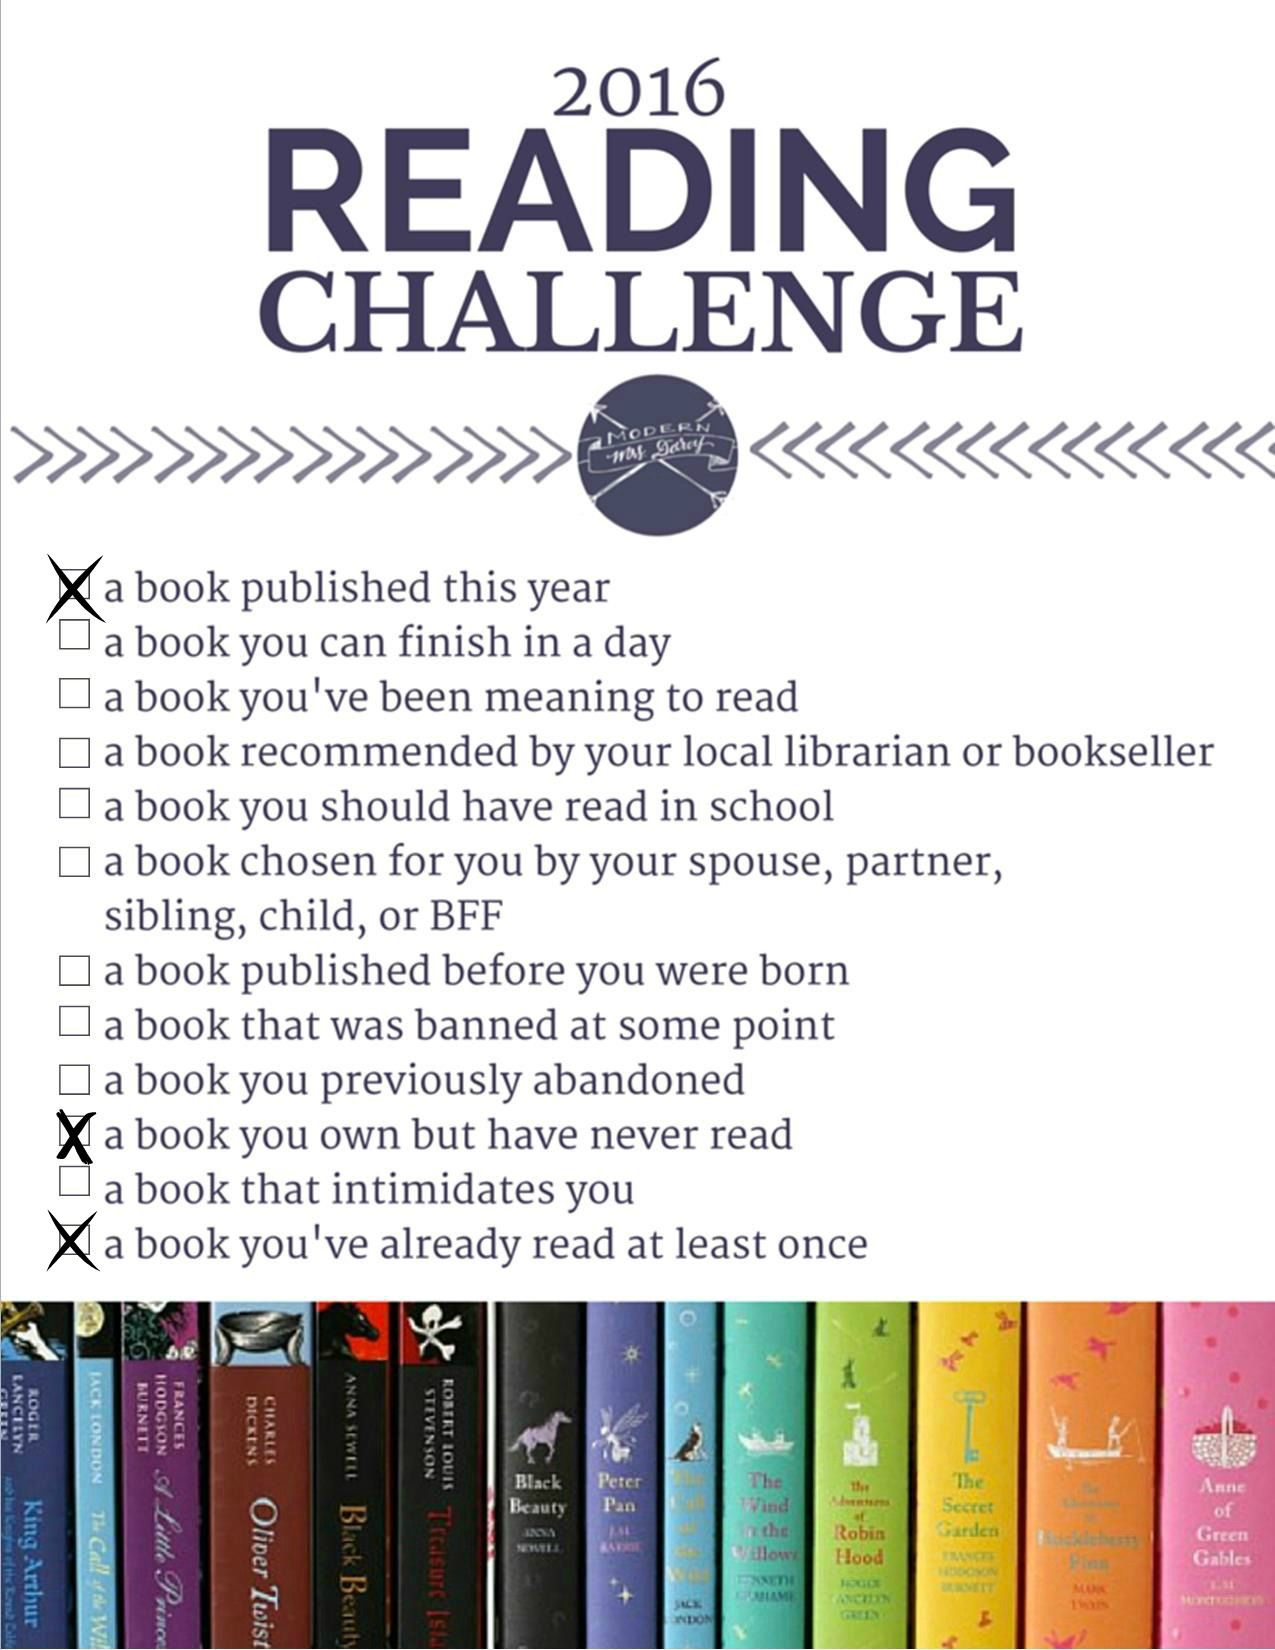 Laura’s Reading Challenge: Book I Have Read More Than Once